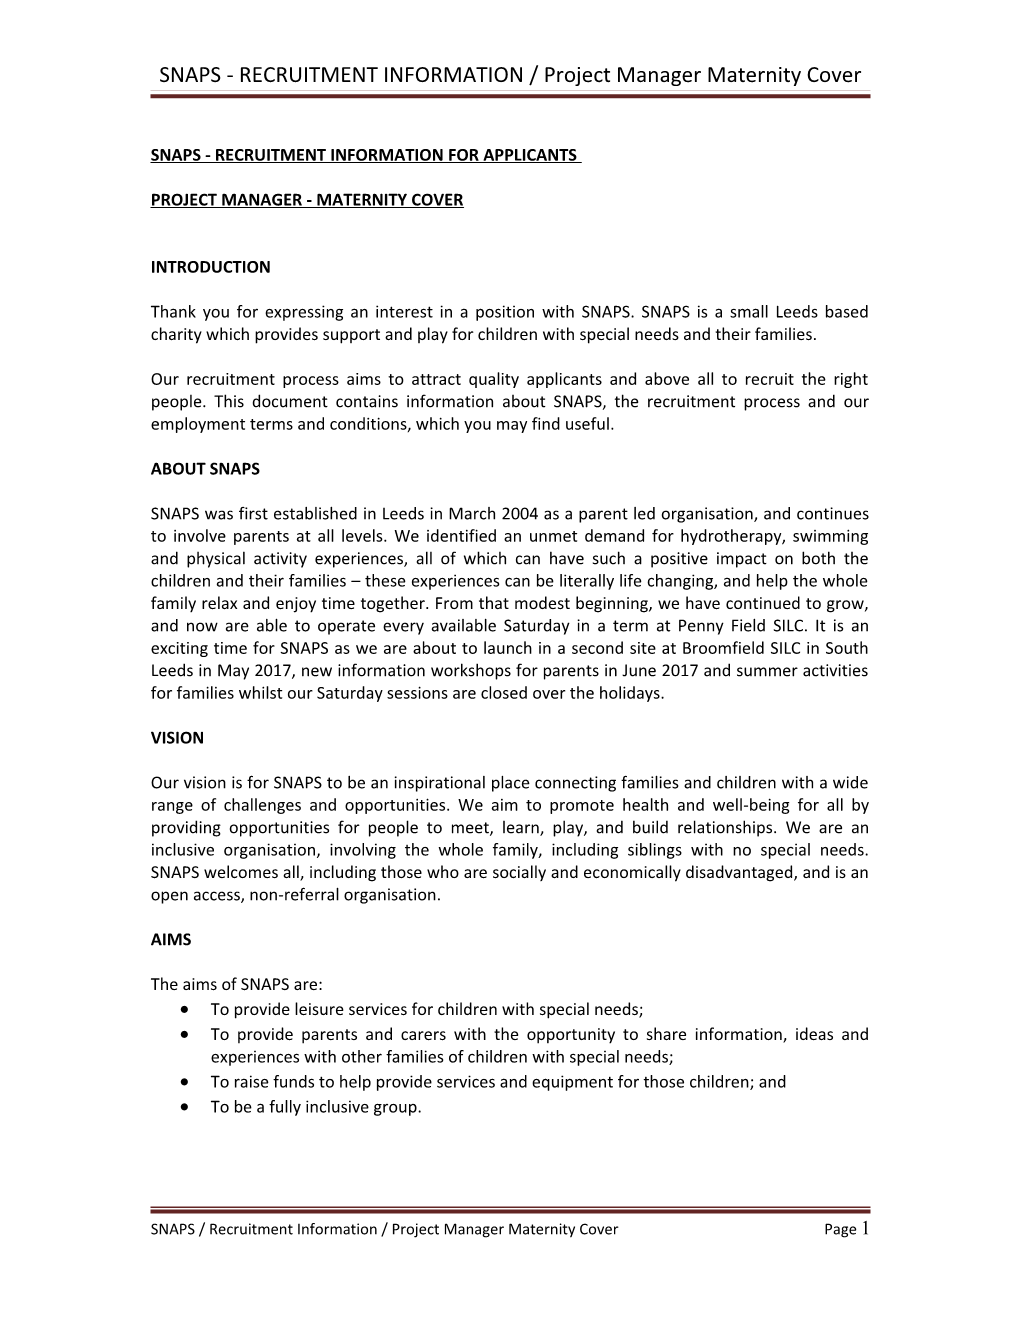 SNAPS - RECRUITMENT INFORMATION / Project Manager Maternity Cover